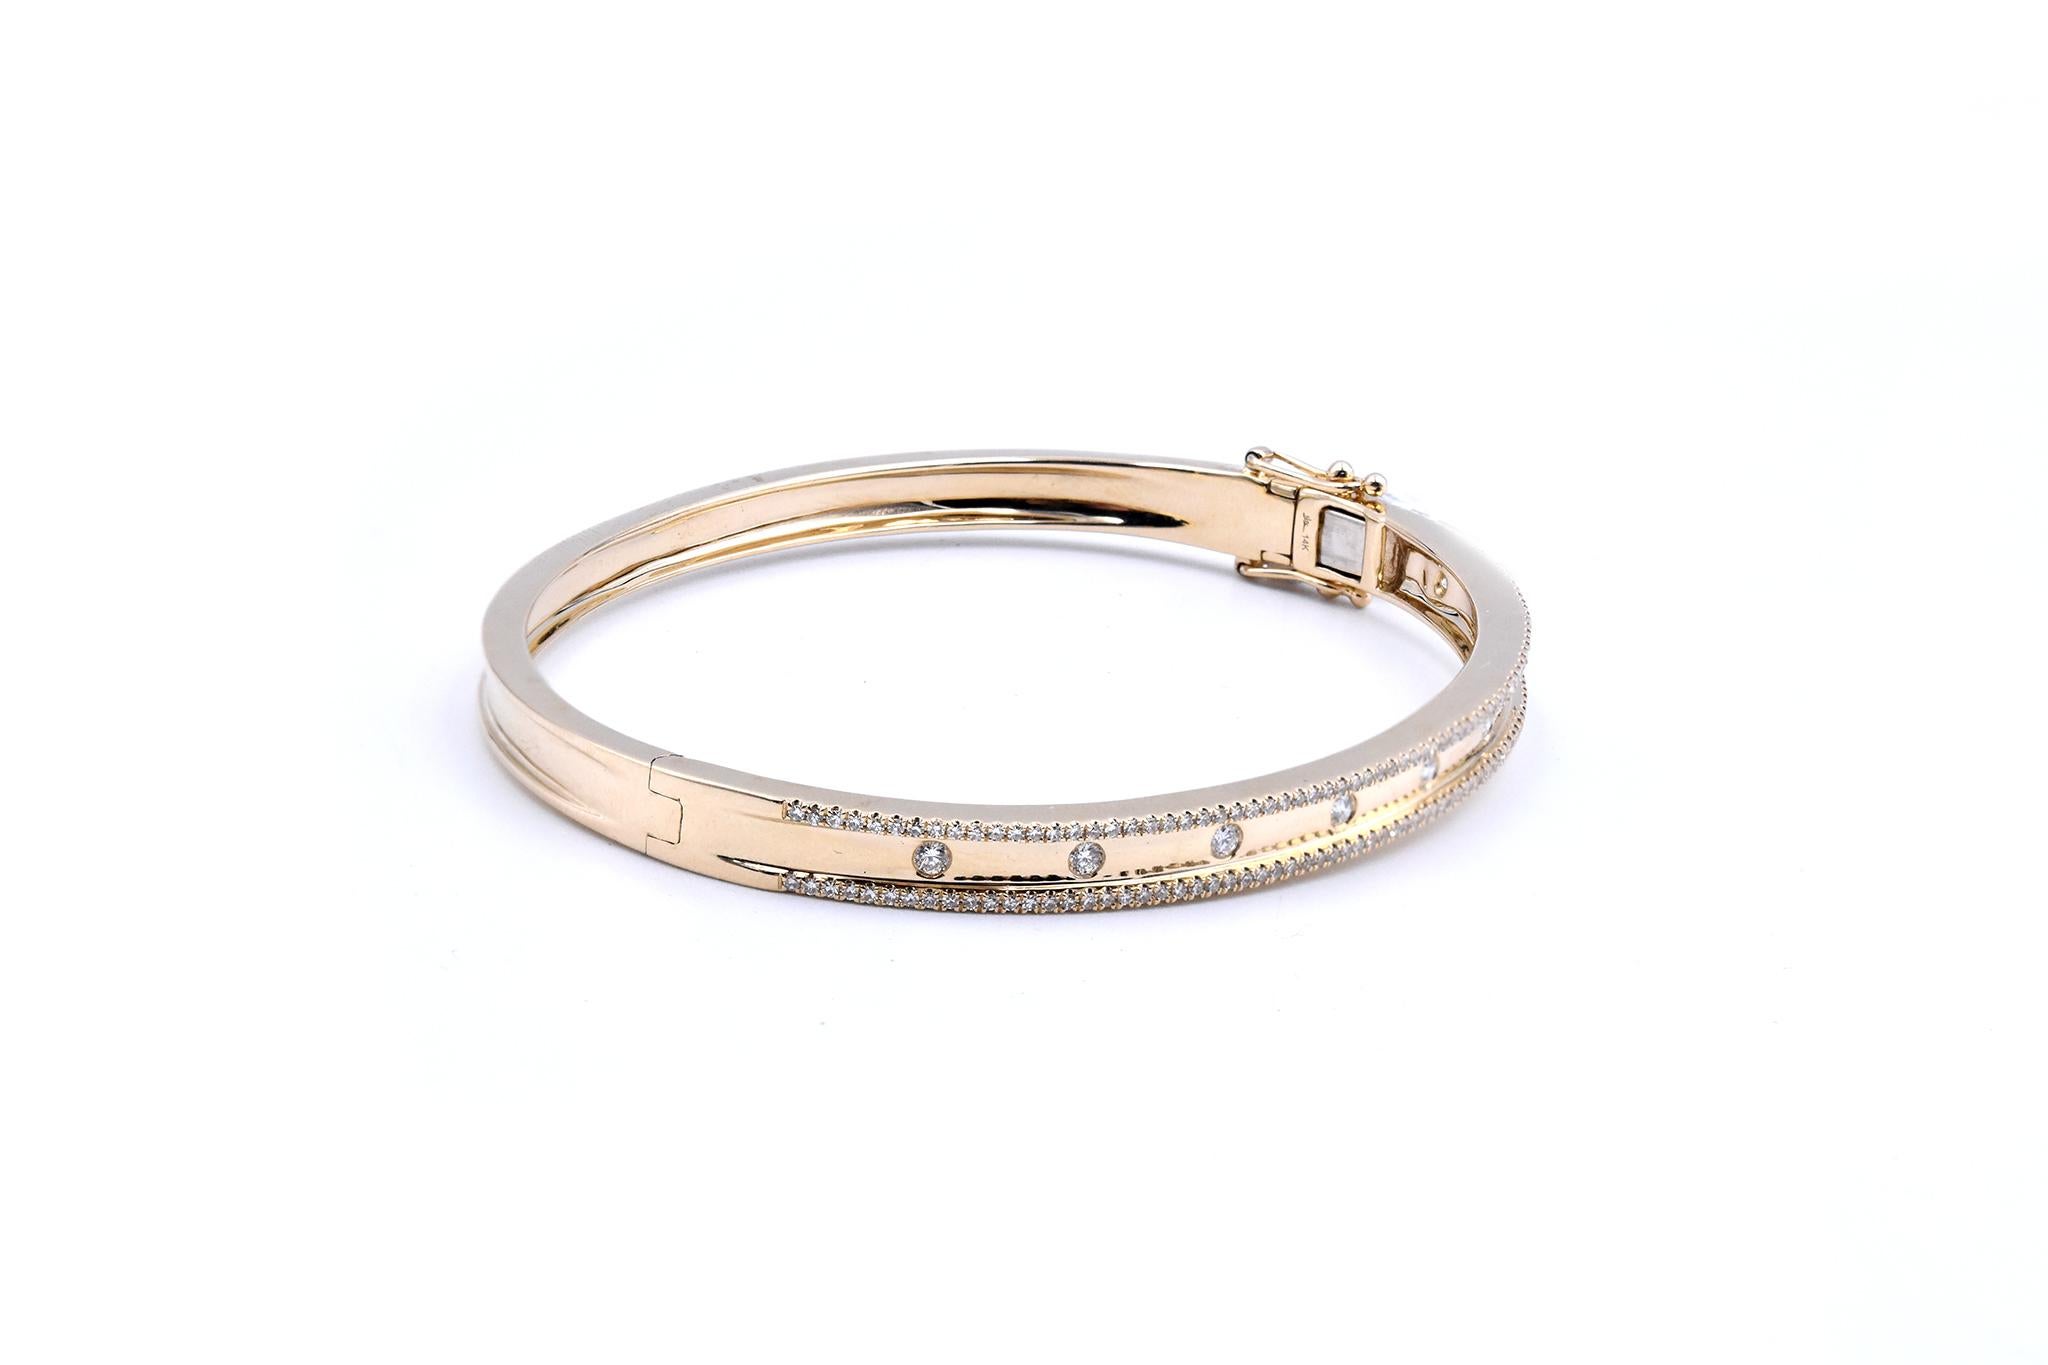 Material: 14k yellow gold
Diamonds: round brilliant cuts = 0.62cttw
Color: G
Clarity: VS
Dimensions: bangle will fit a 6 ½ -inch wrist
Weight: 15.87 grams